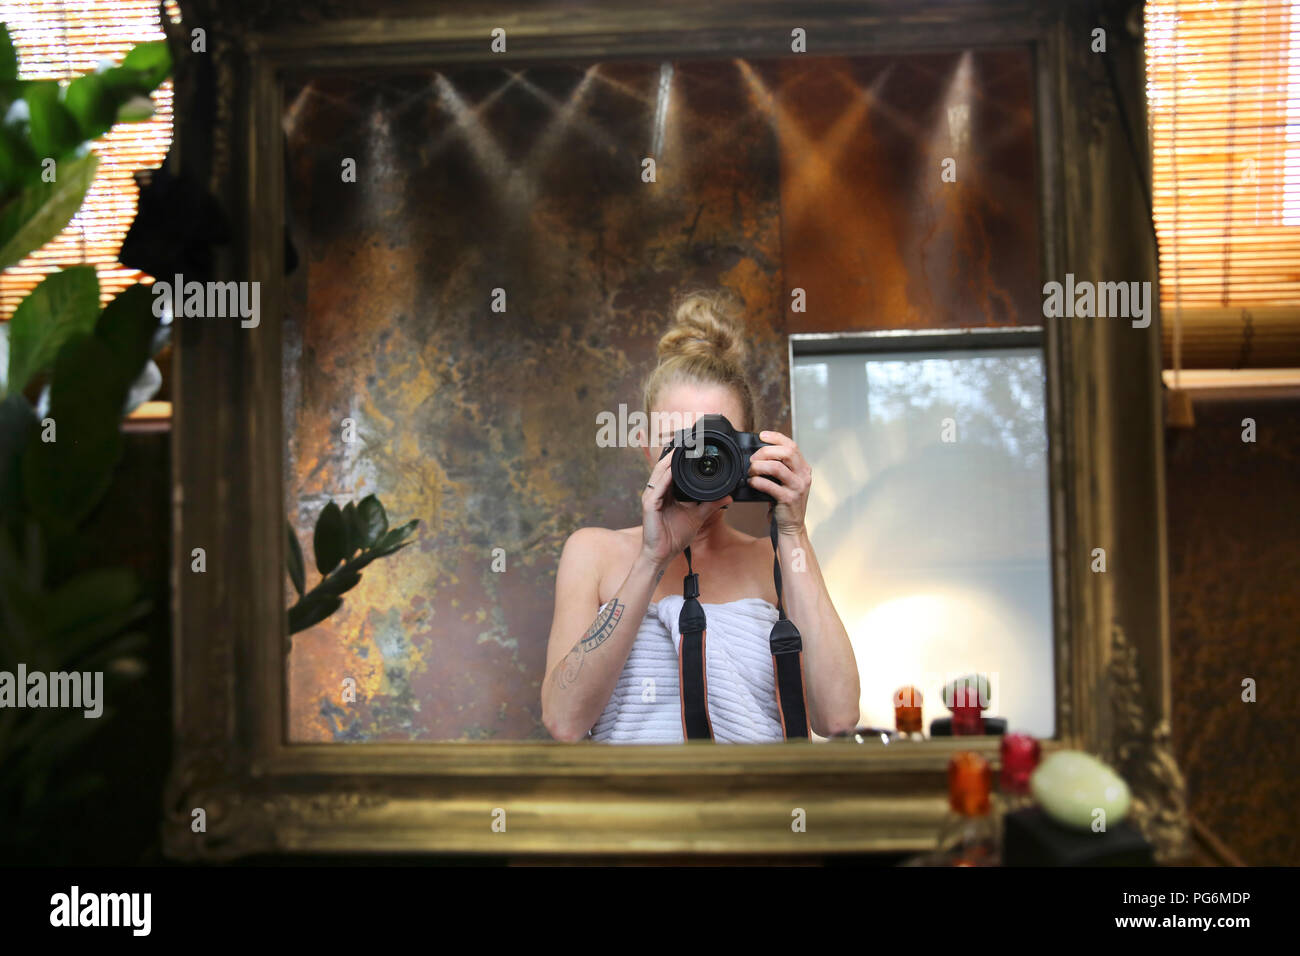 Mirror image of woman taking selfie with camera in bathroom Stock Photo